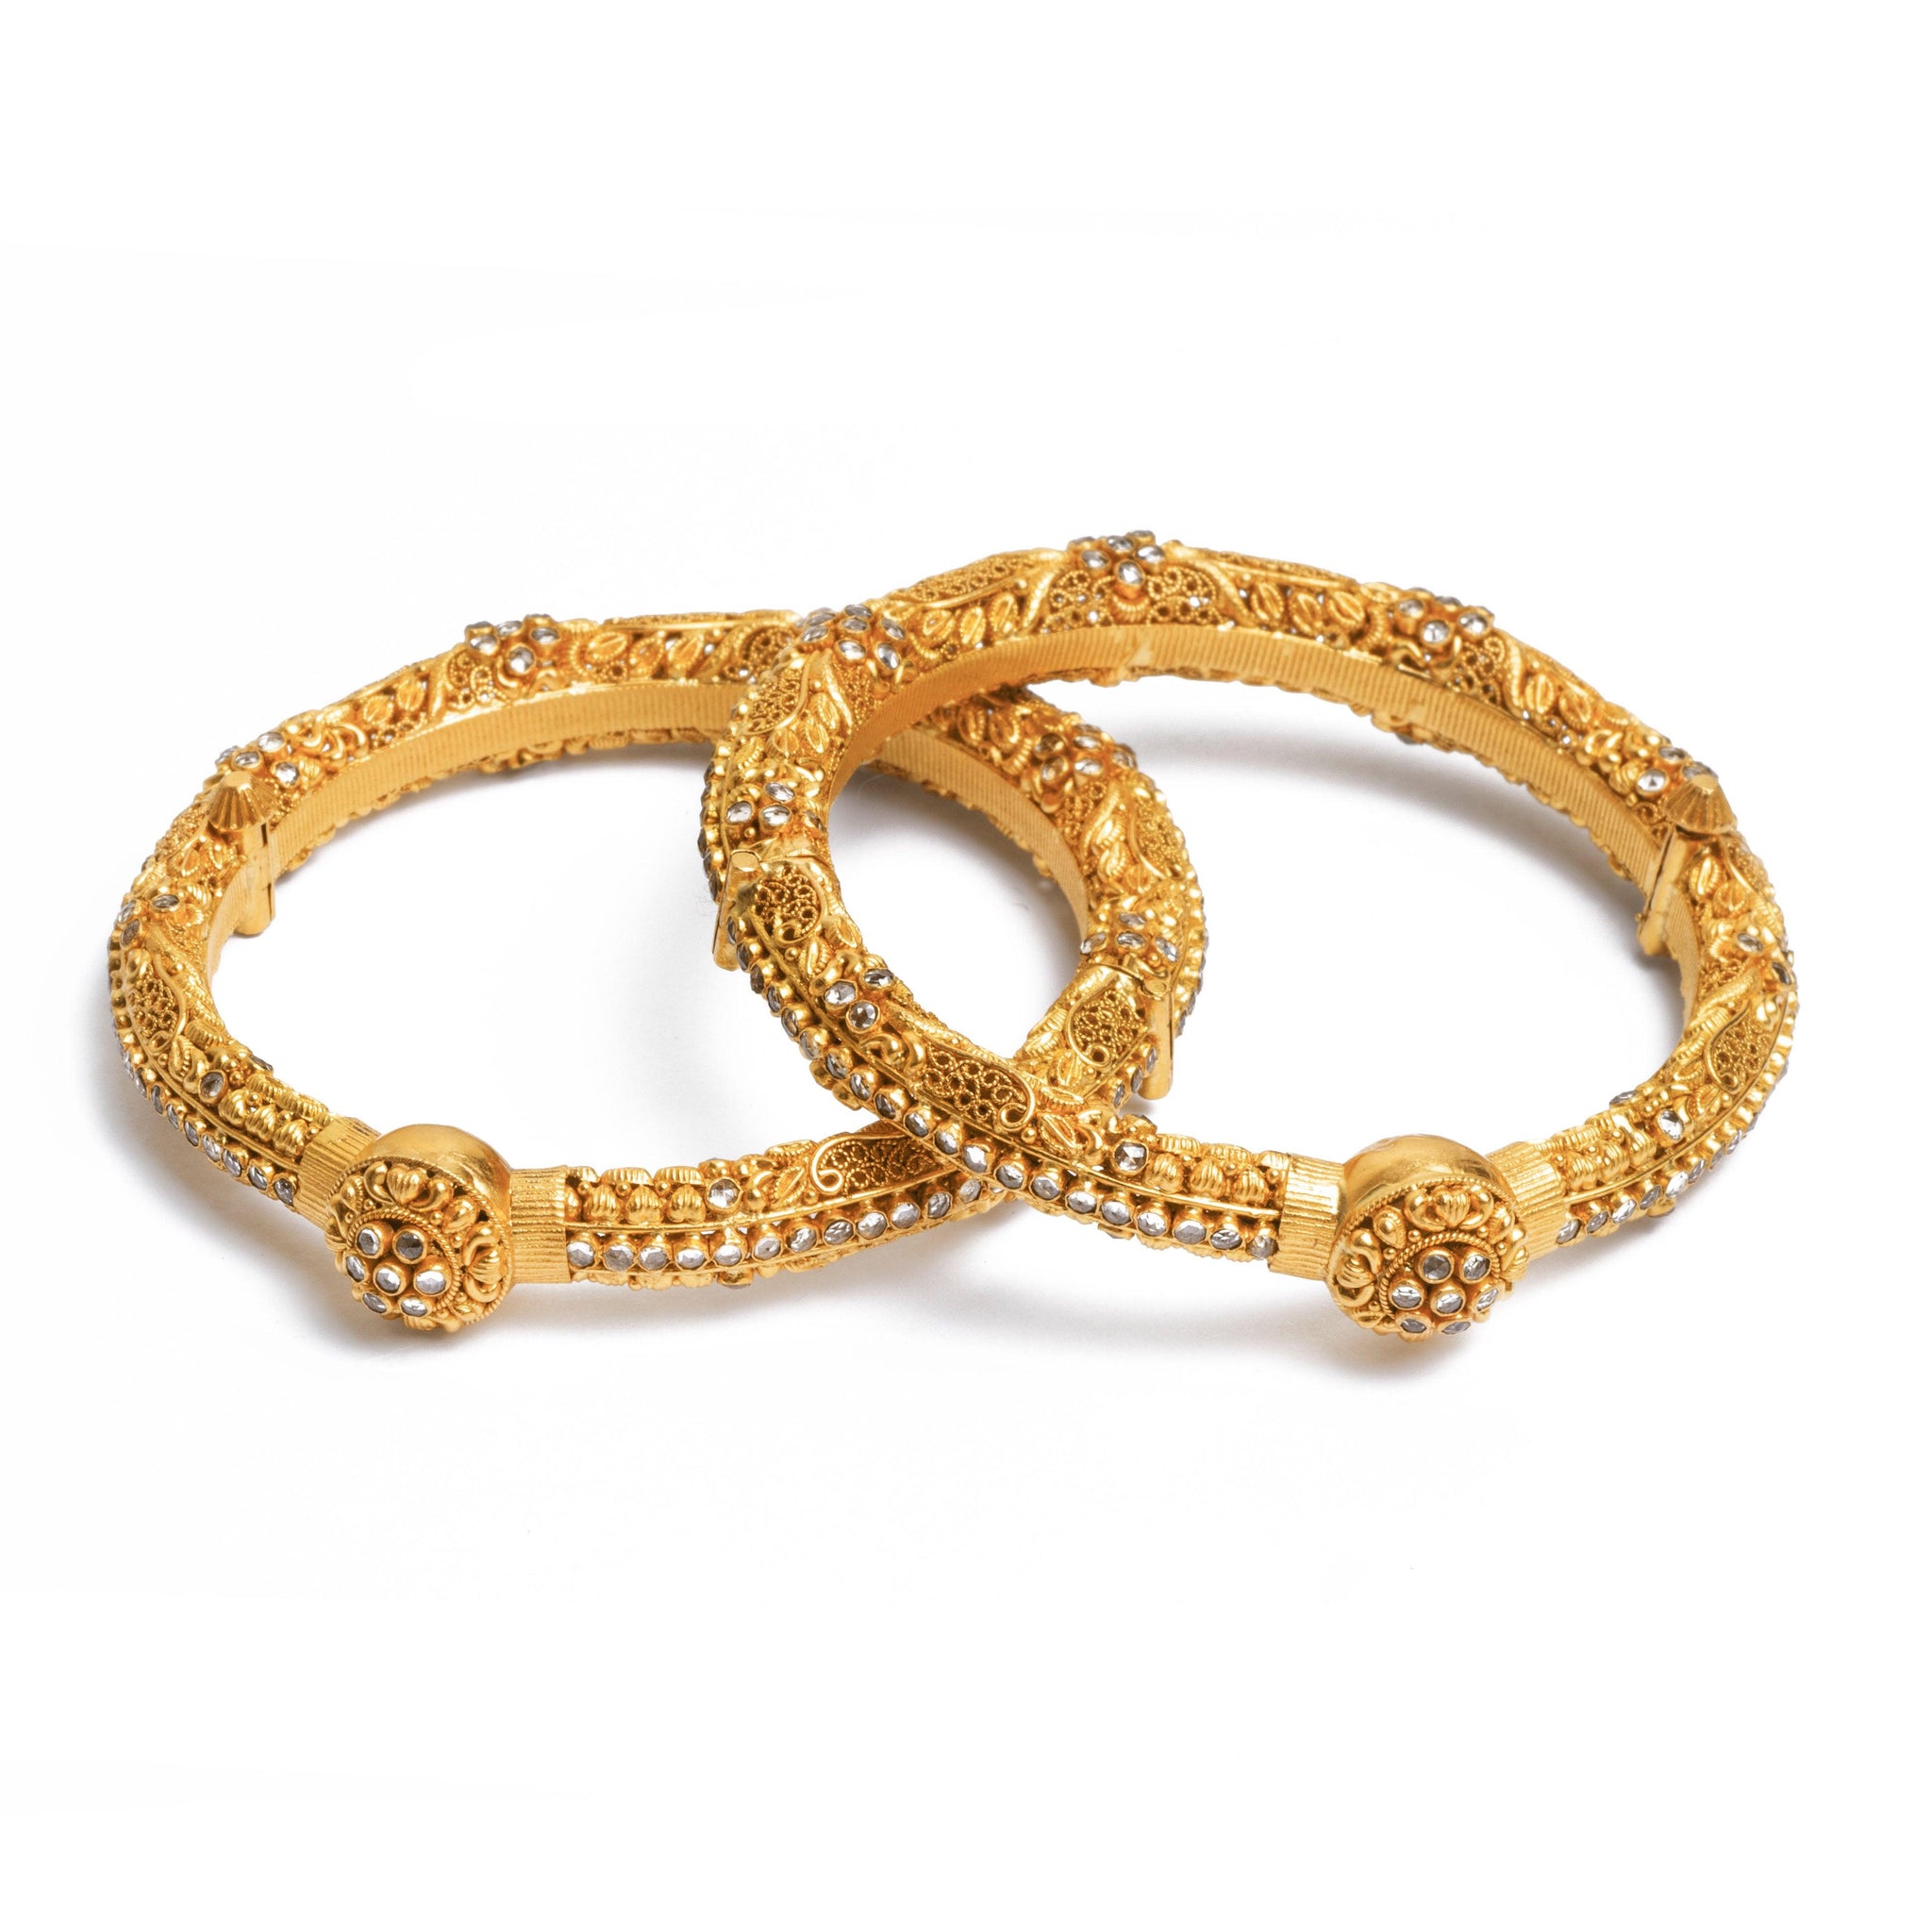 Pair of 22ct Gold Antiquated Look Openable Bangles with Polki Style Stones (71g) B-8277